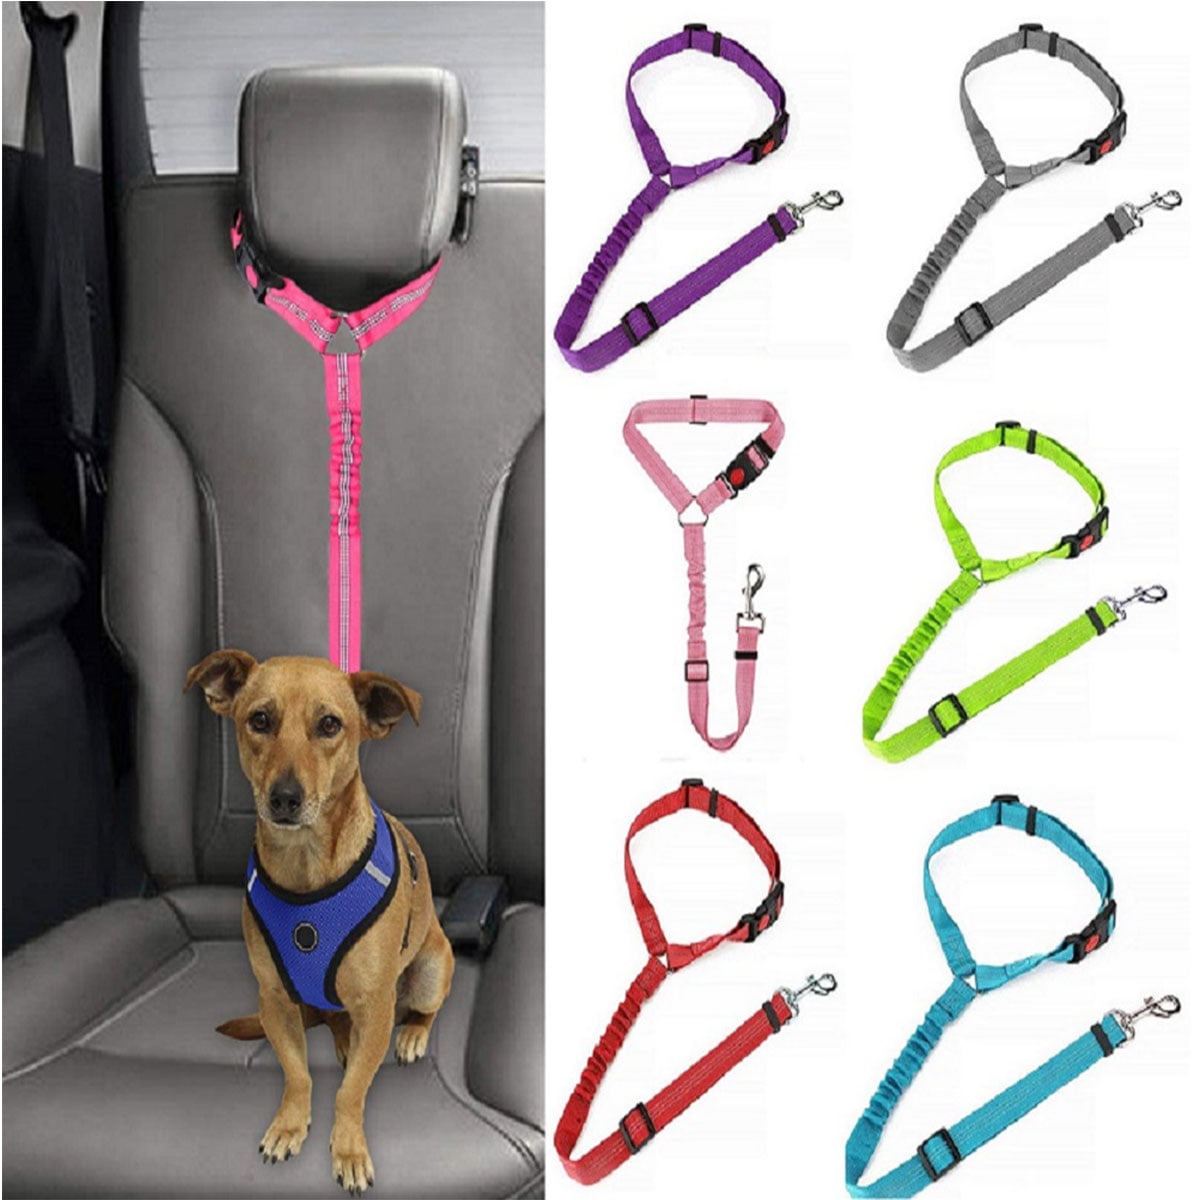 Pet Cat Dog SeatBelt Harness Adjustable Length Strong Dog Car Seat Belt Clip for Travel Safety Medium Fit Small Large Dogs Dog Seat Belt for Car Elastic Anti Shock Buffer Nylon Bungee Lead